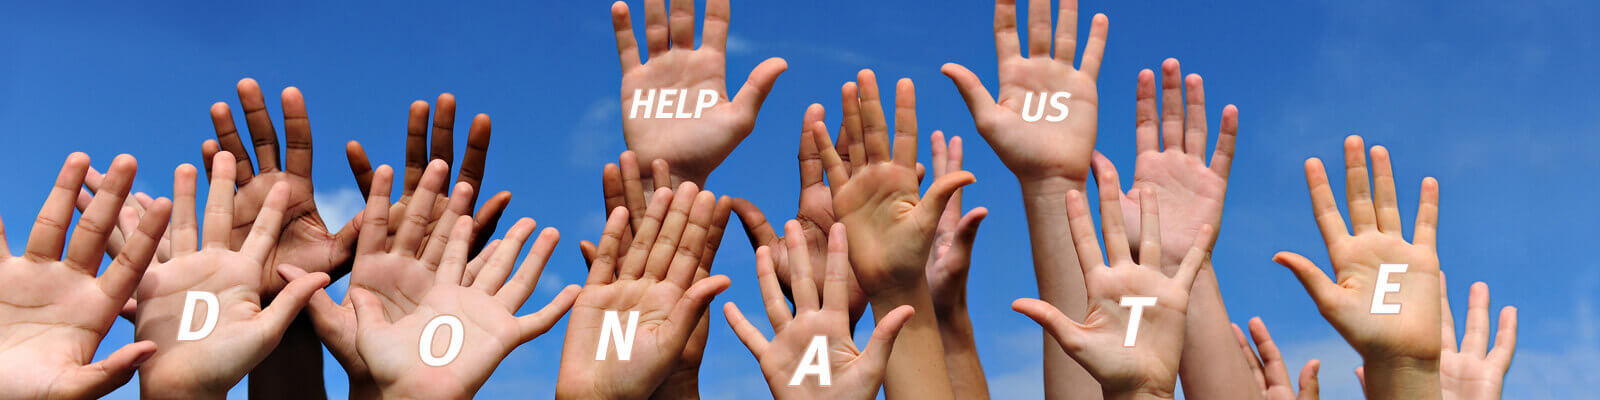 Hands held palm forward towards the sky with blue sky background with the words Help Us Donate on the palms.